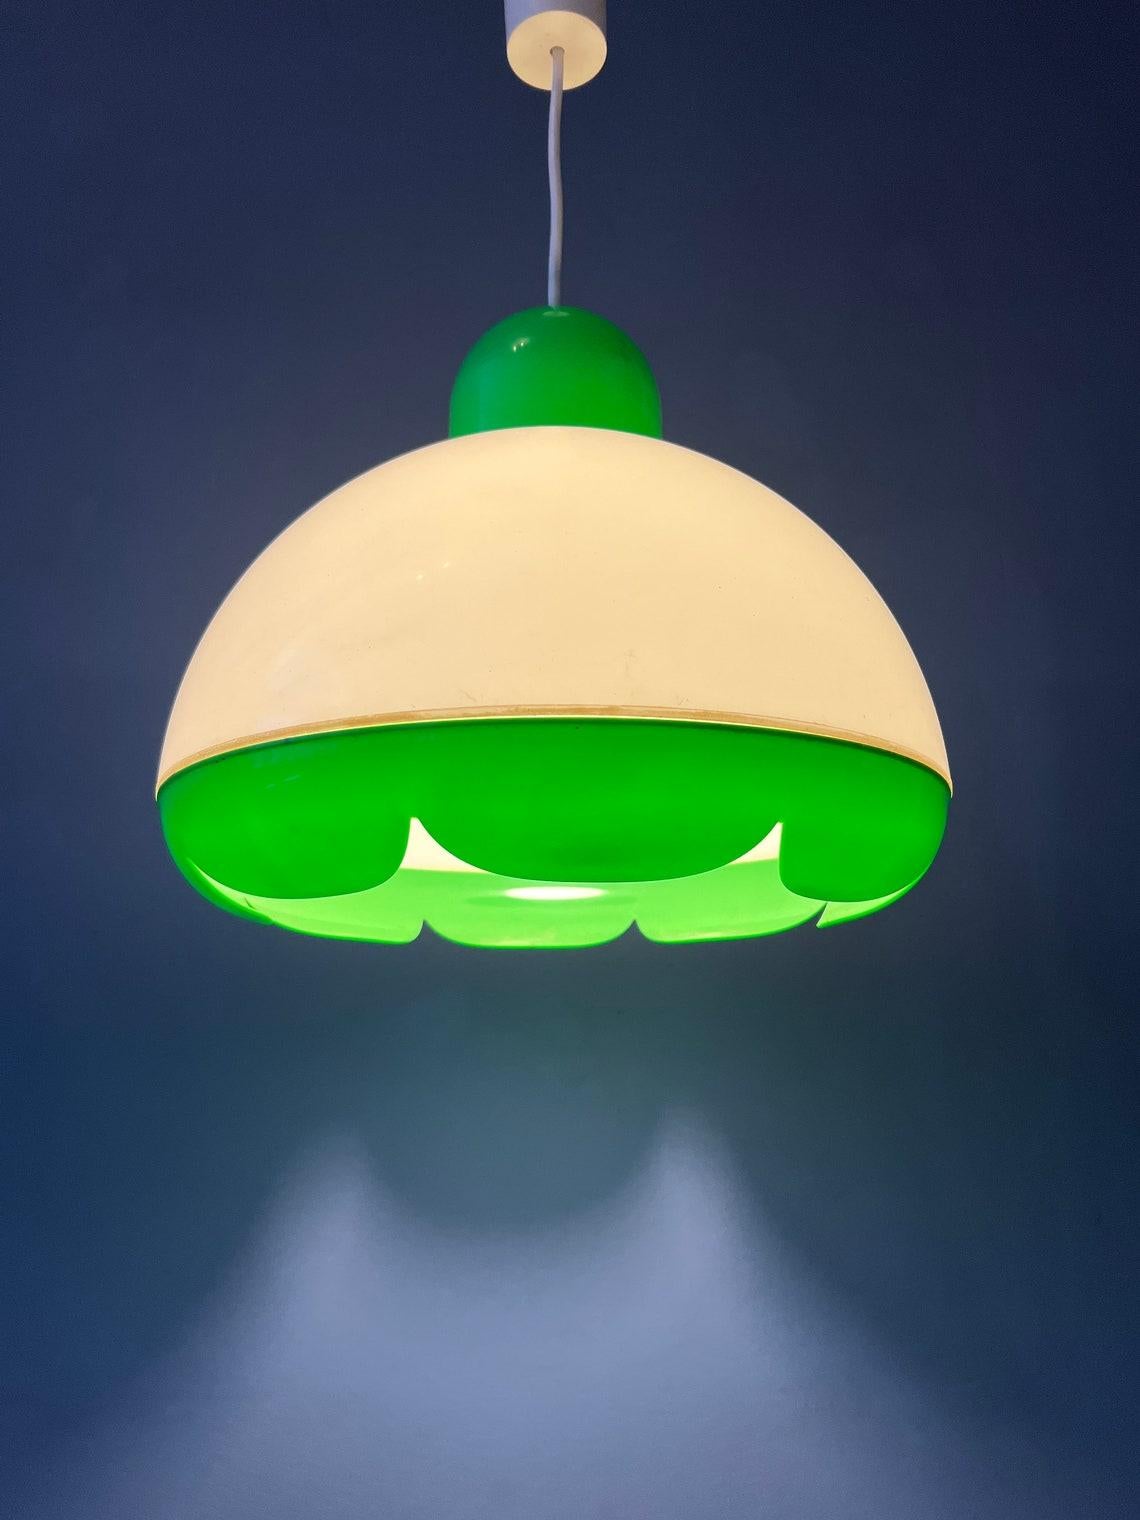 Extremely rare green acrylic glass space age pendant lamp with a flower-like pattern. The lamp requires one E26/27 (standard) lightbulb.

Additional information:
Materials: Metal, plastic, wood
Period: 1970s
Dimensions:ø: 37 cm
Height (shade): 31